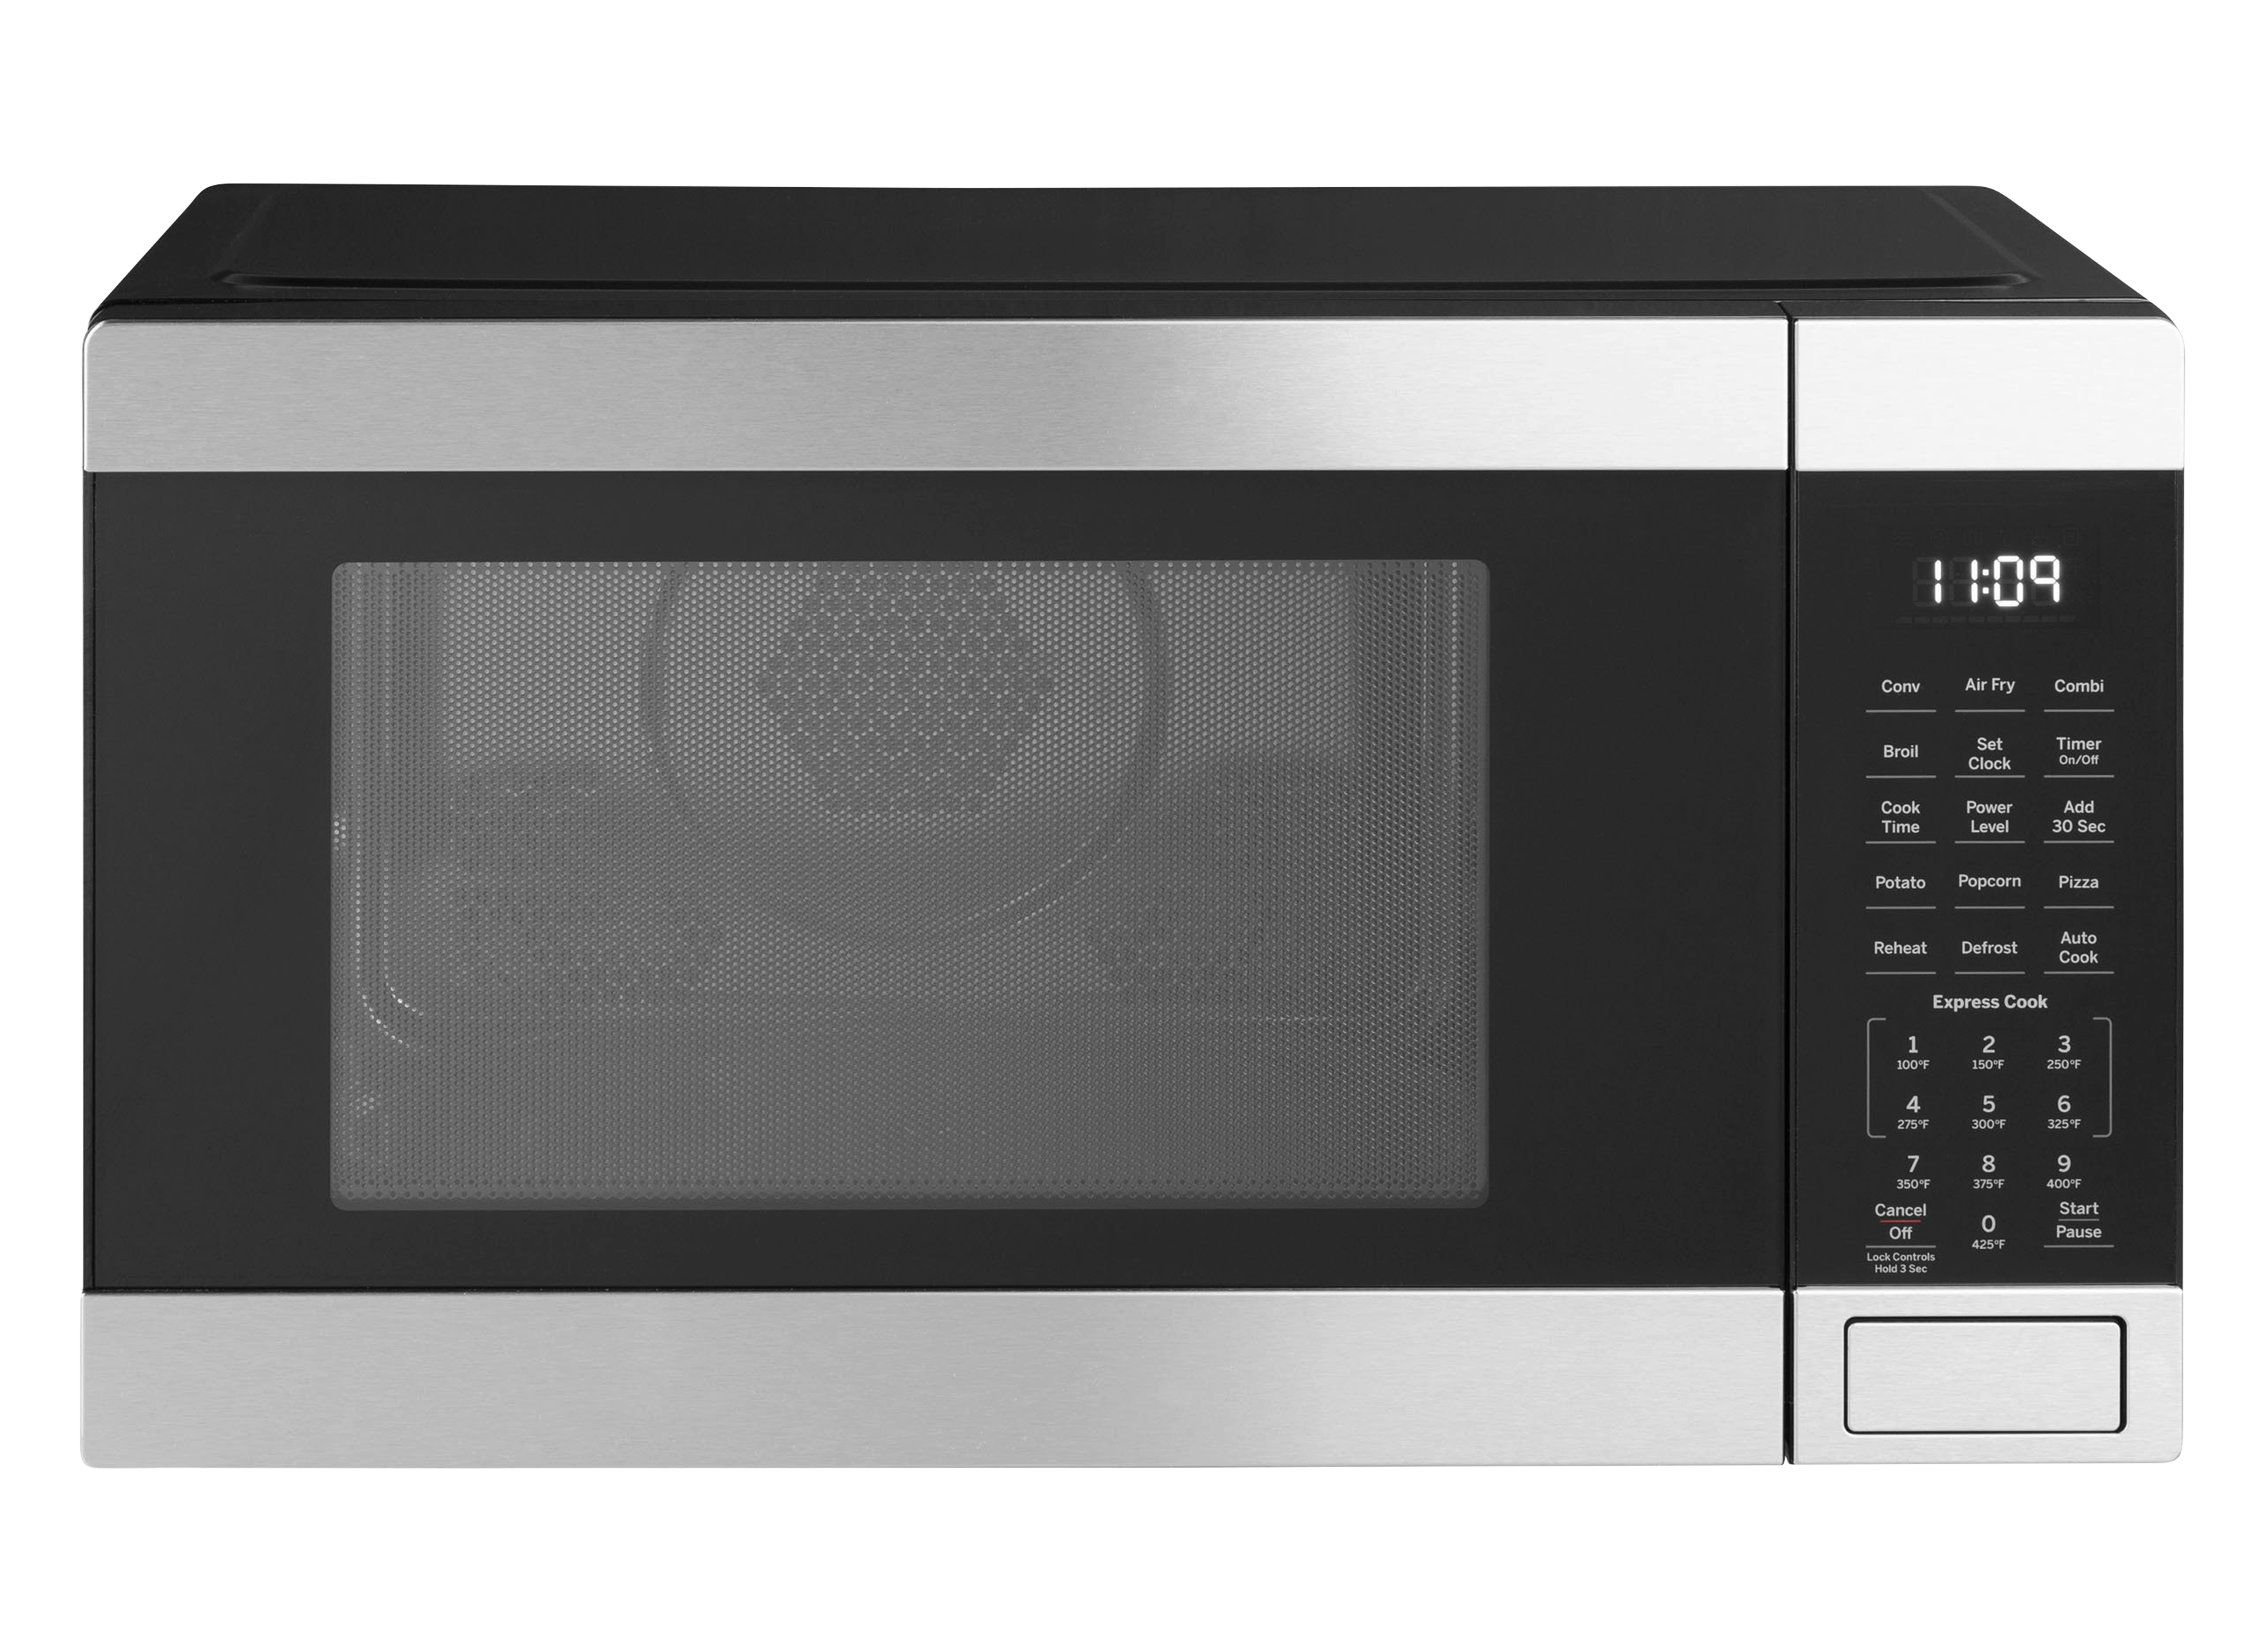 https://crdms.images.consumerreports.org/prod/products/cr/models/405833-midsized-countertop-microwaves-ge-je1109rrss-10027370.png